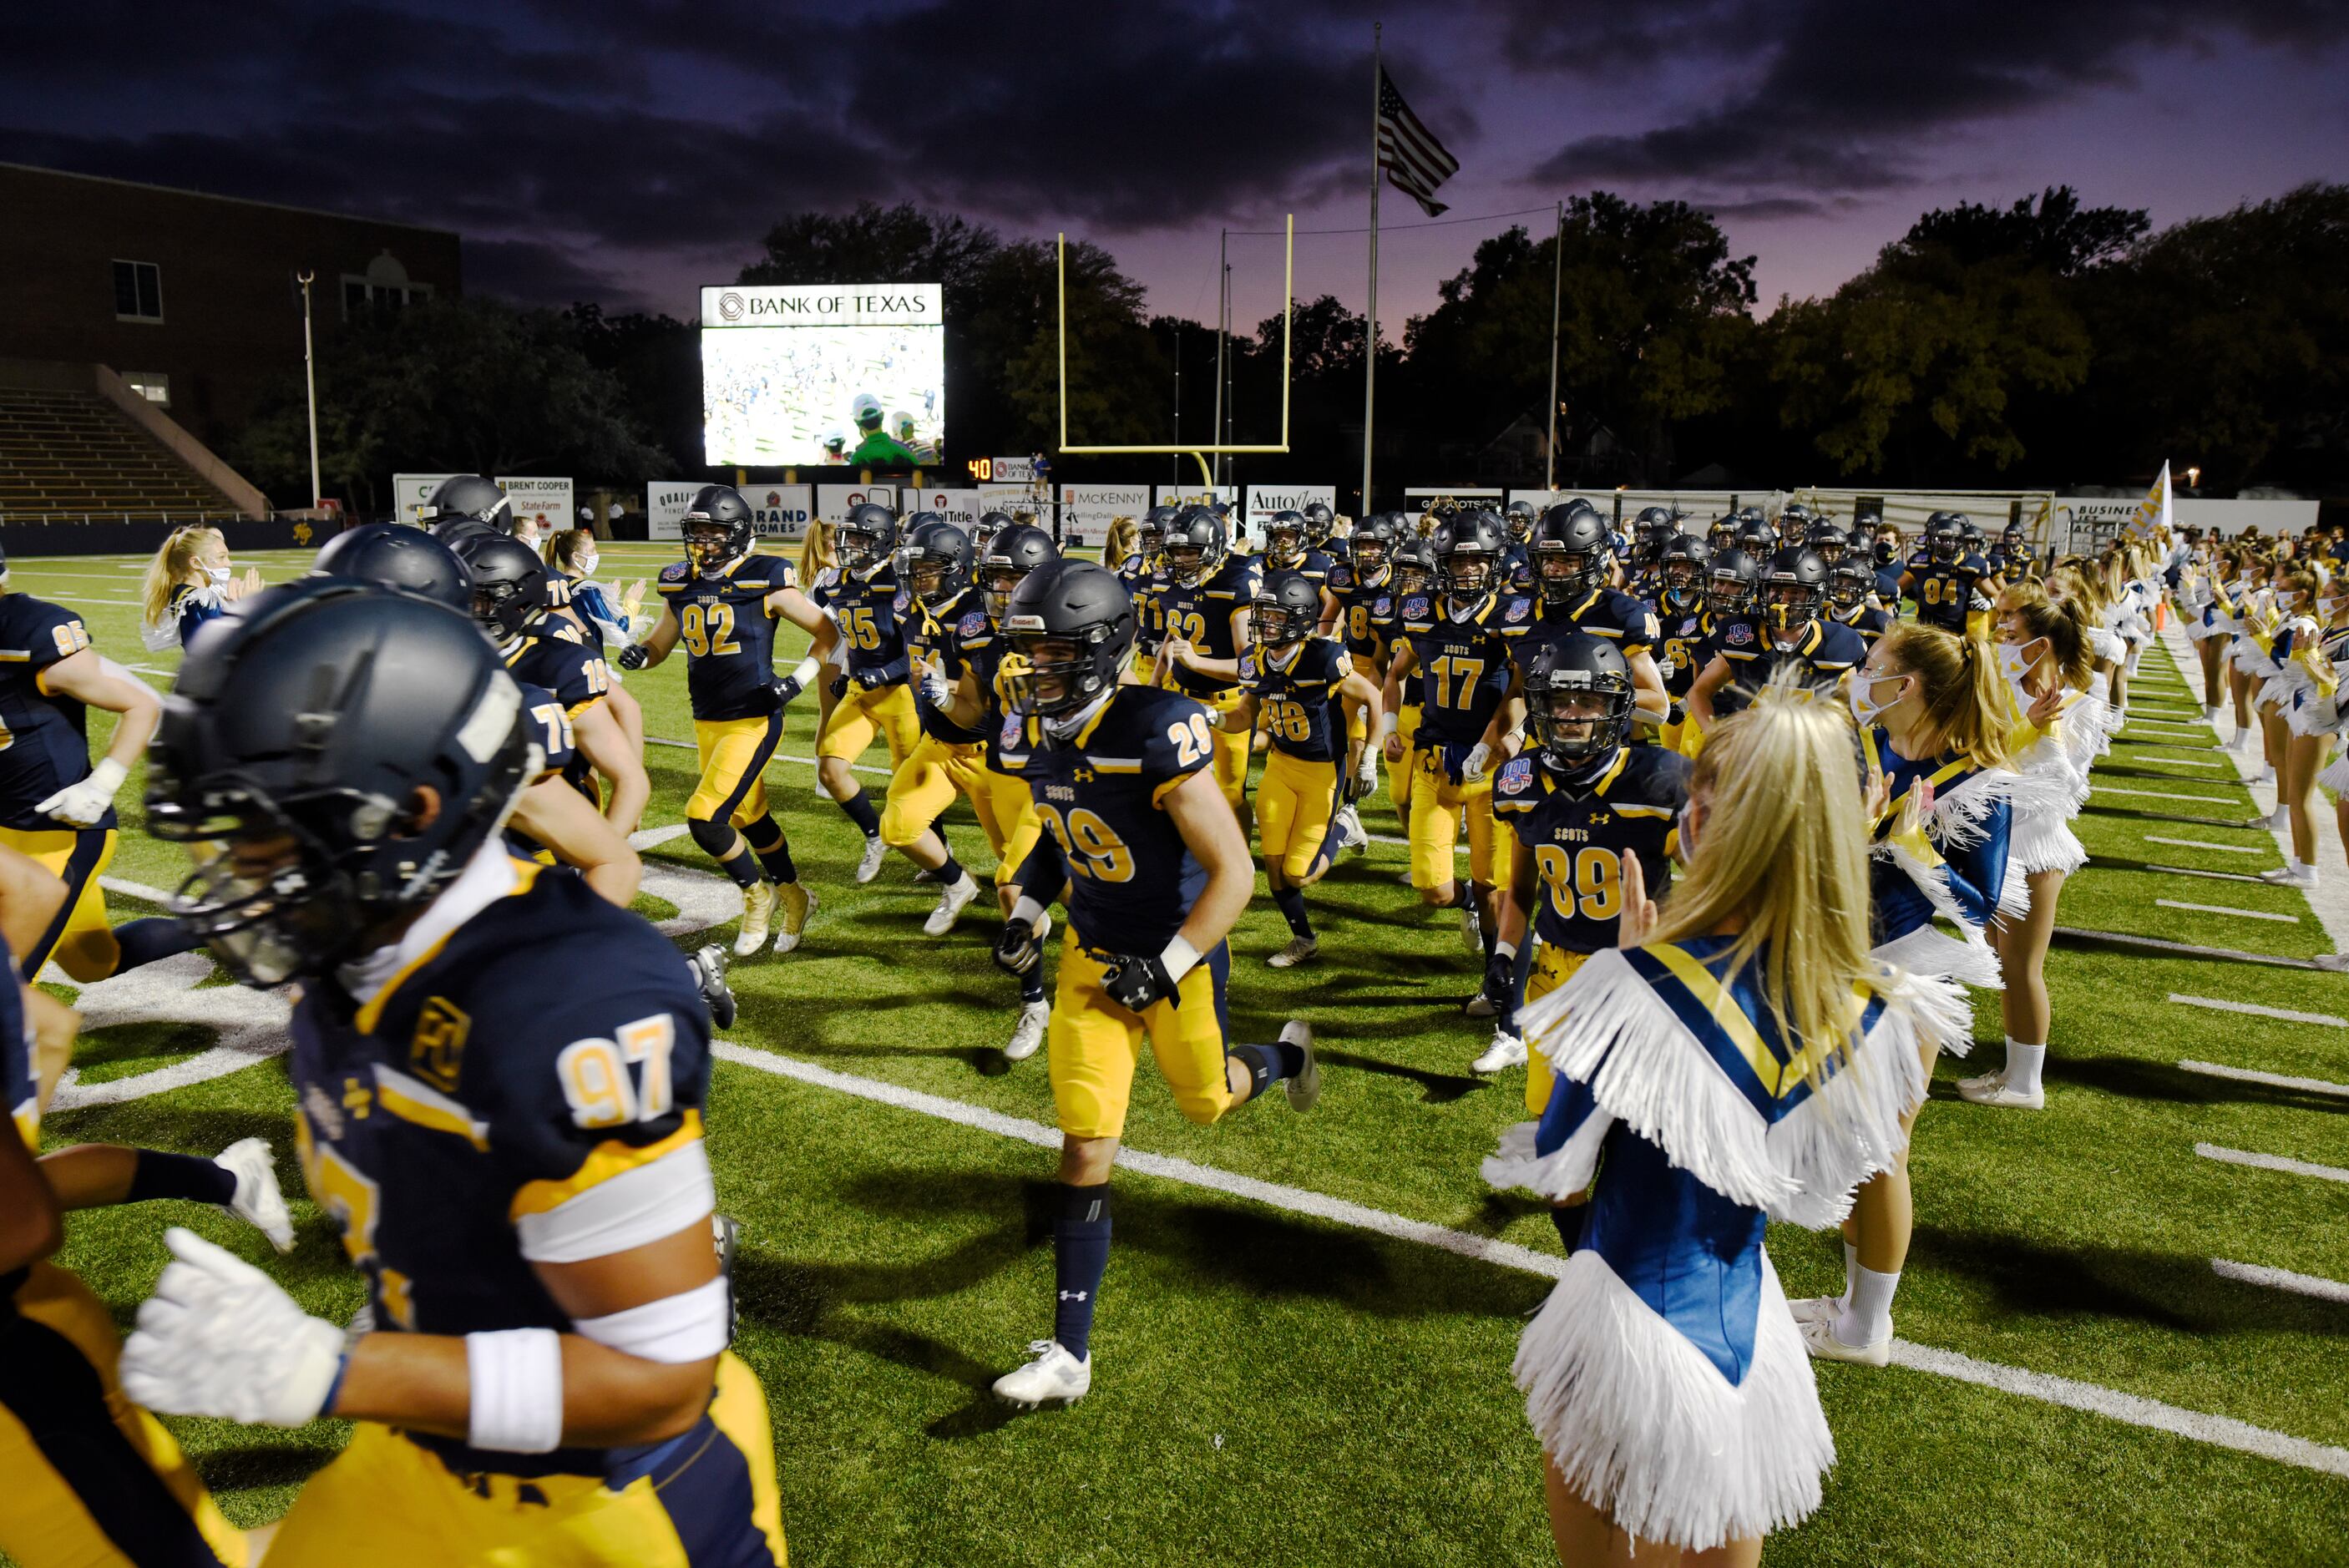 The Highland Park varsity football team runs on to the field for their game versus Coppell...